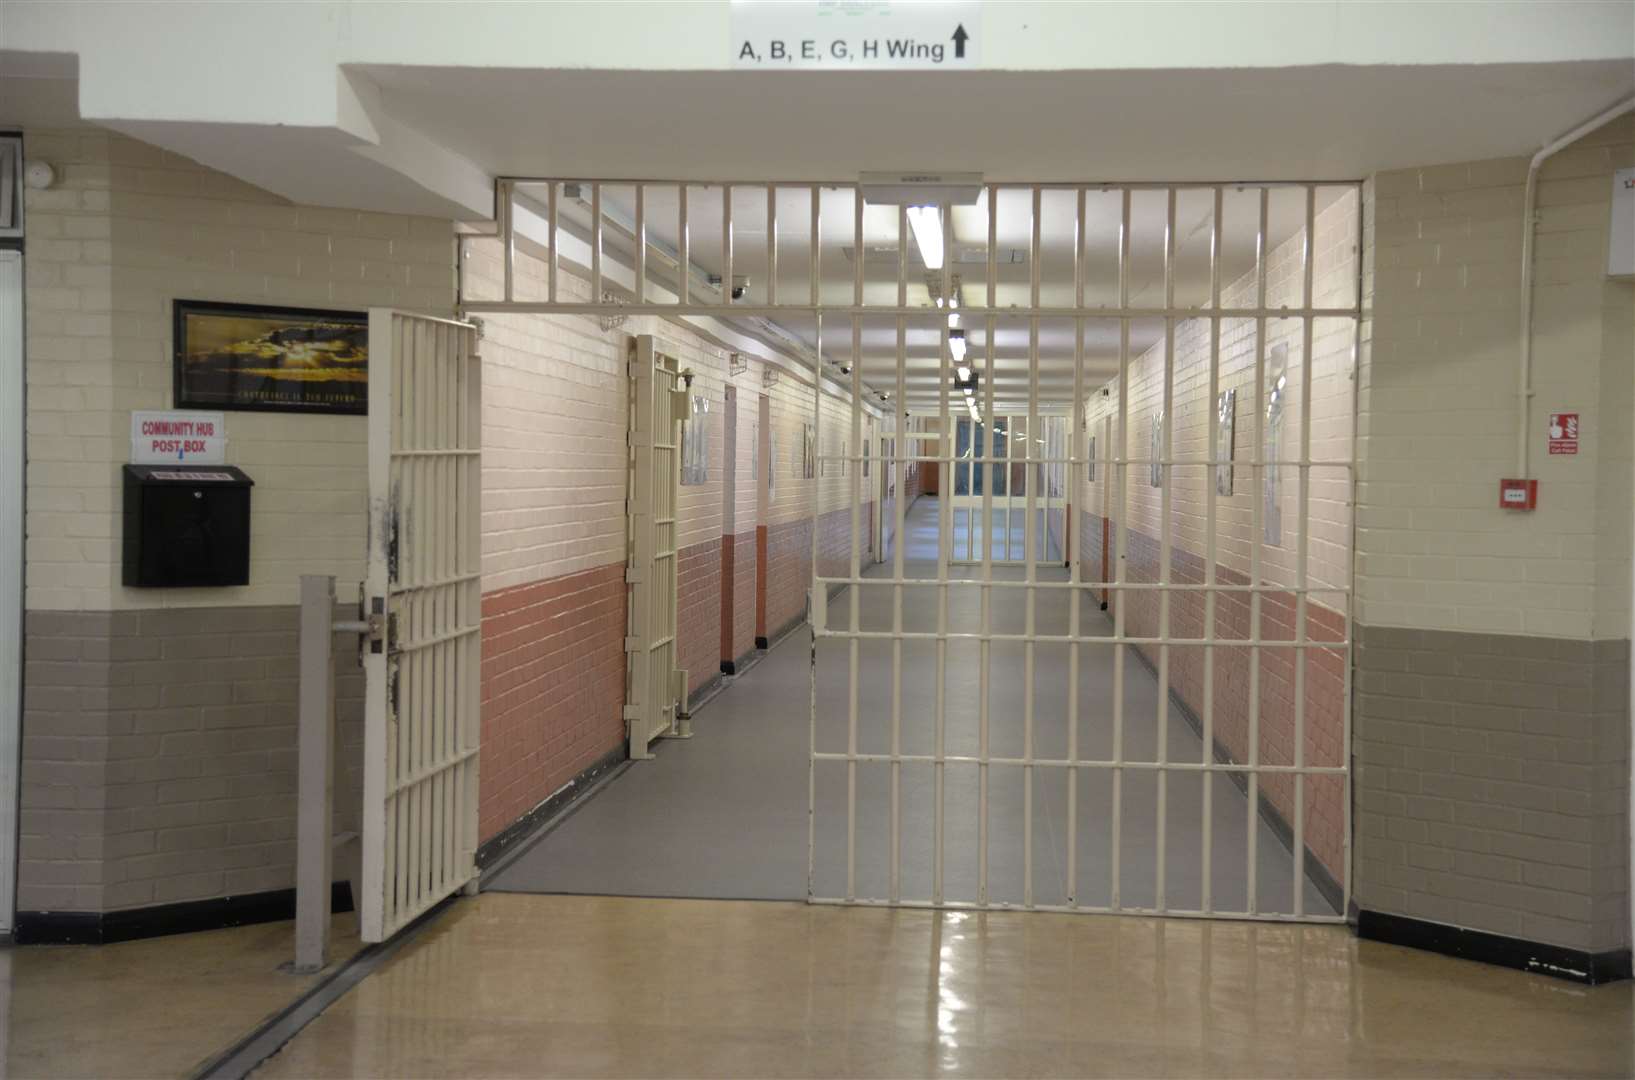 HMP Swaleside on the Isle of Sheppey